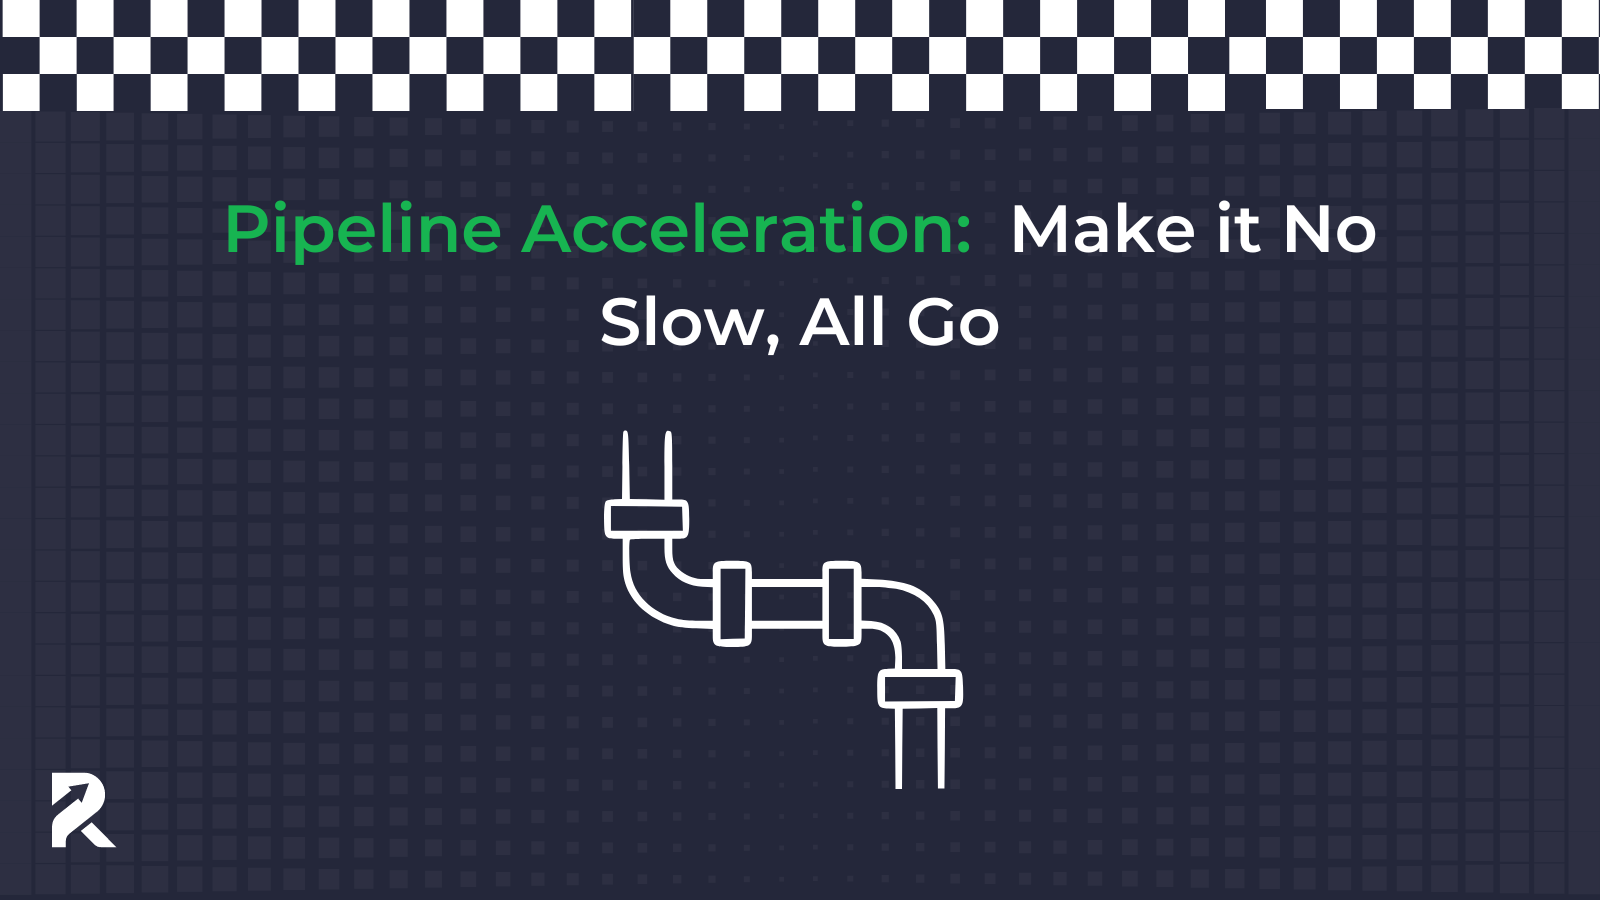 Pipeline Acceleration: Make it No Slow, All Go